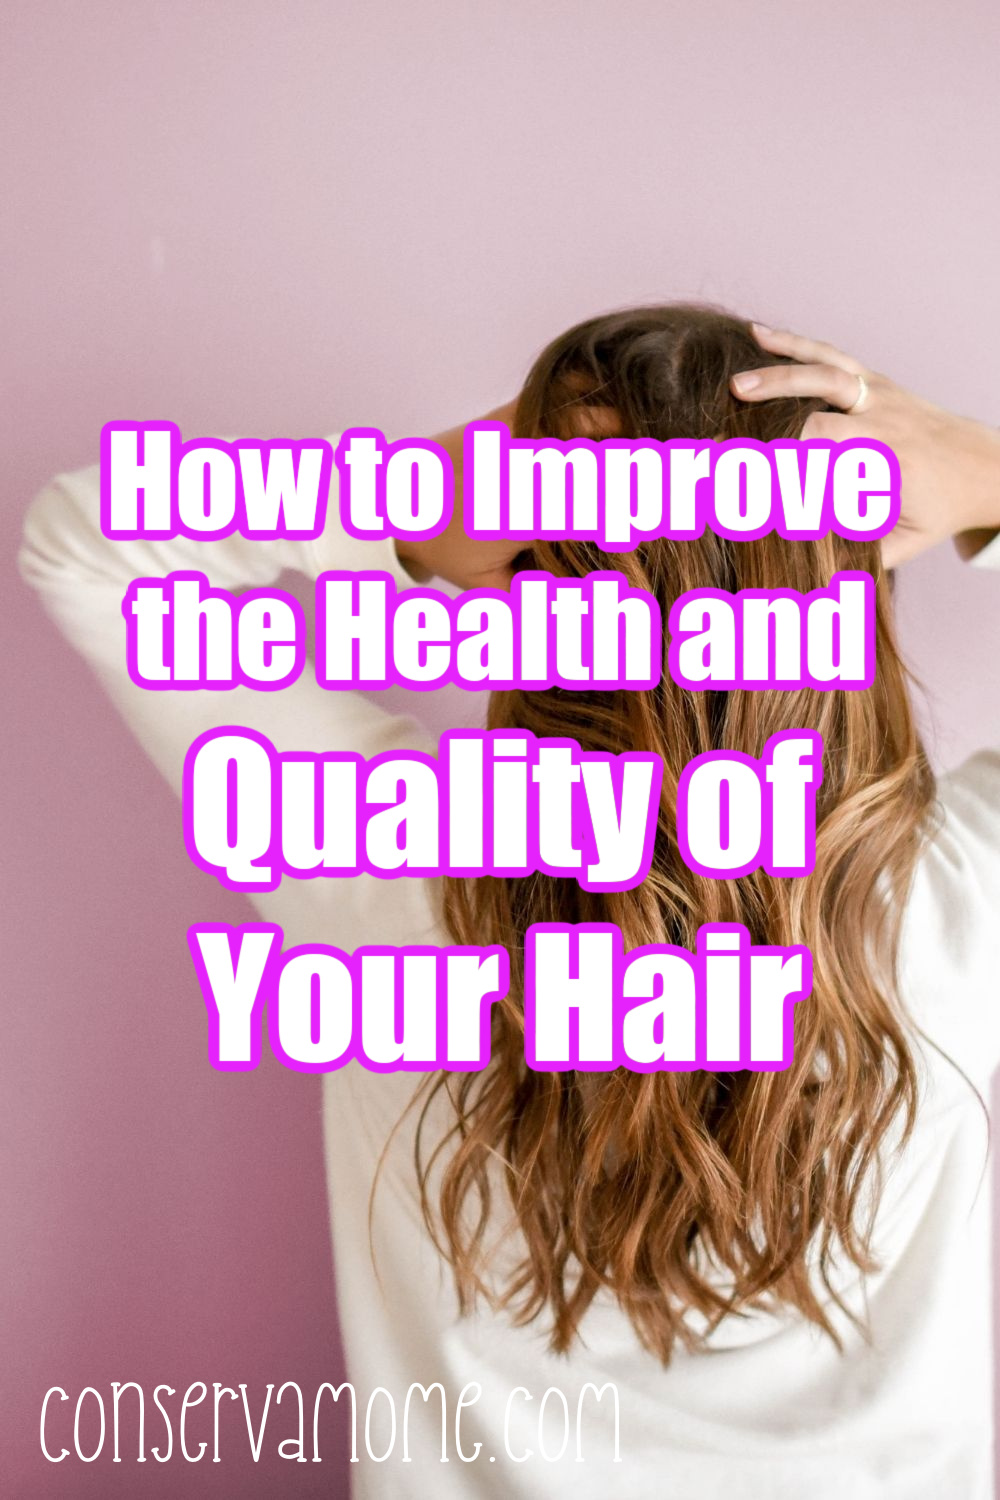 How to Improve the Health and Quality of Your Hair